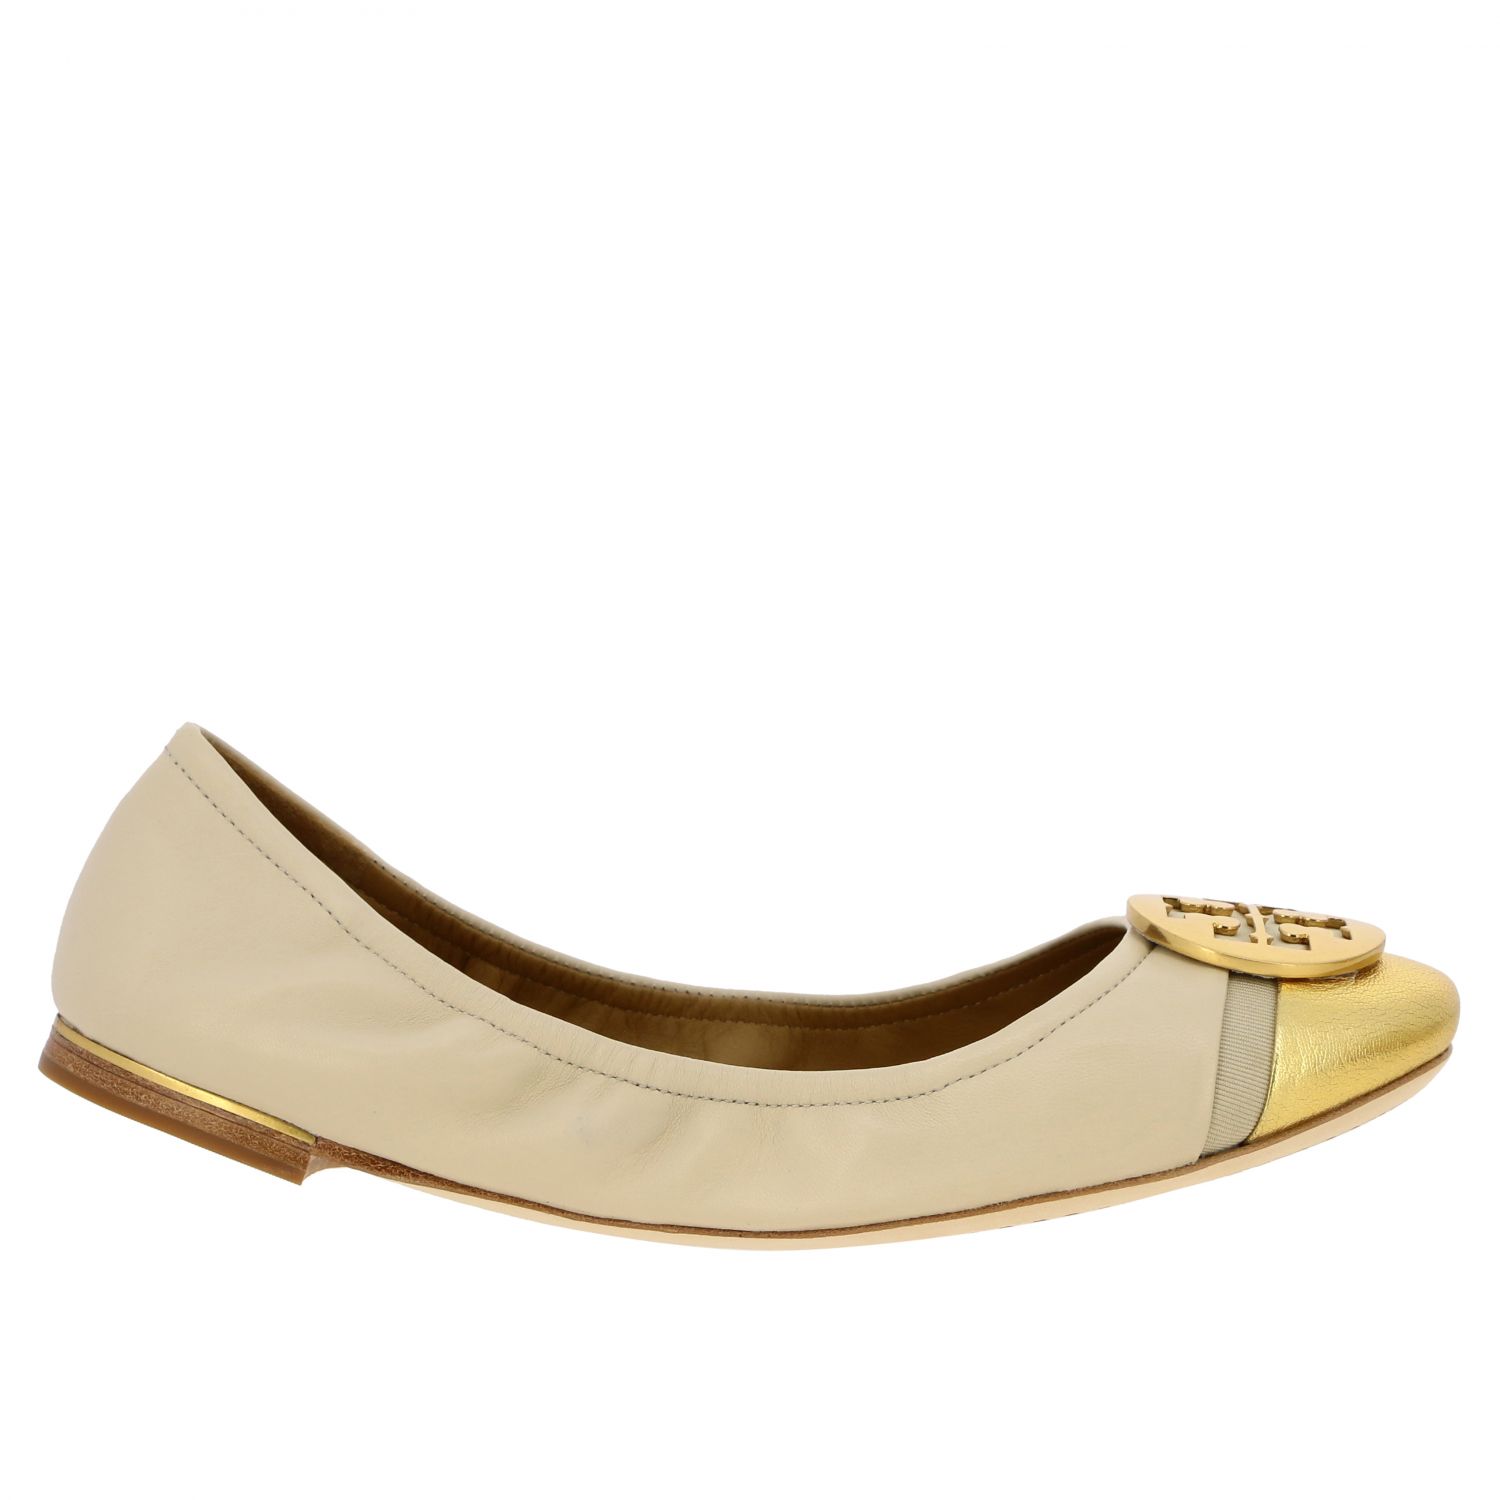 TORY BURCH: Minnie ballet flat in nappa leather with emblem | Ballet ...